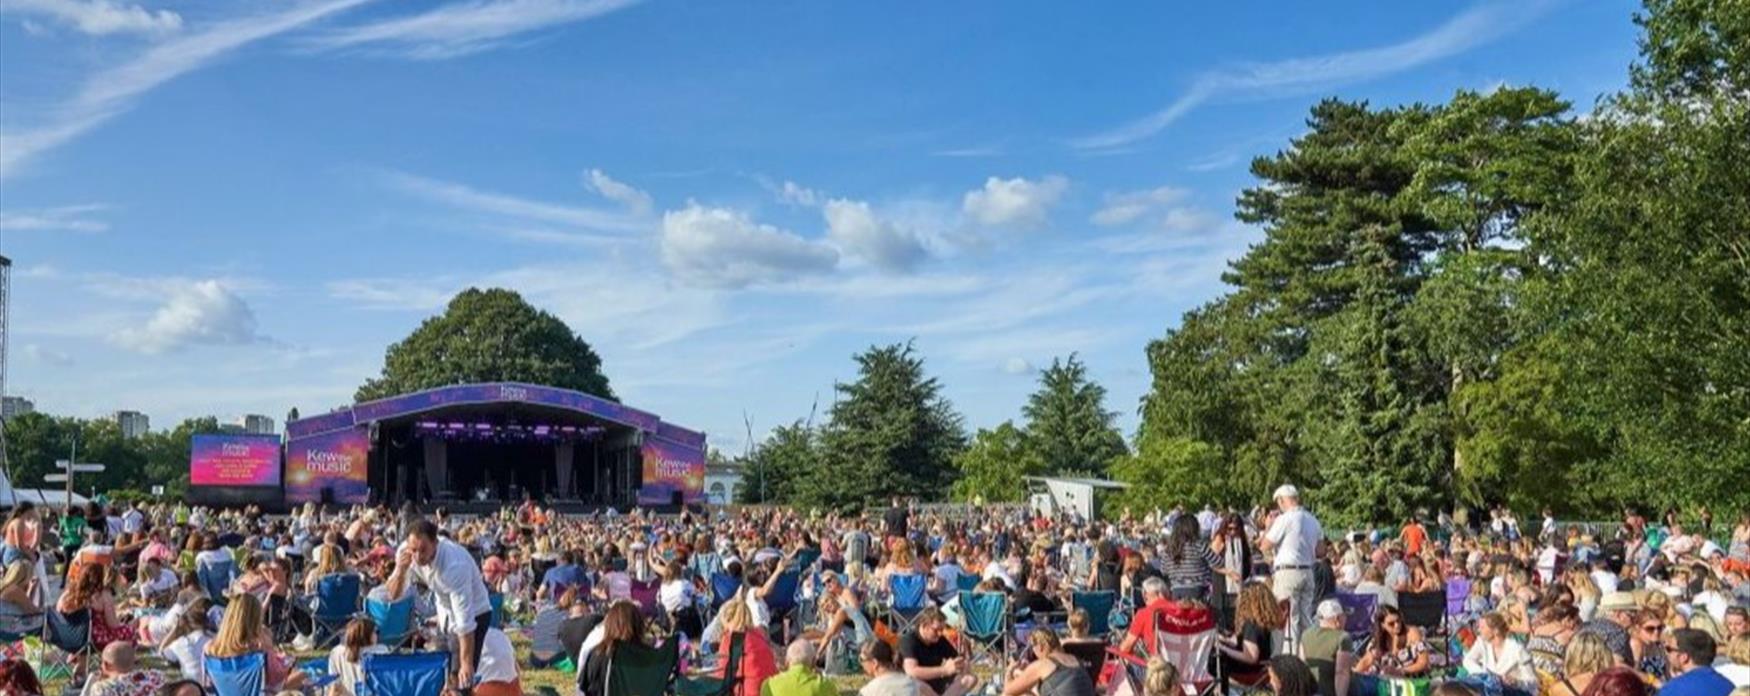 Picture of people enjoying live music on Kew the music festival